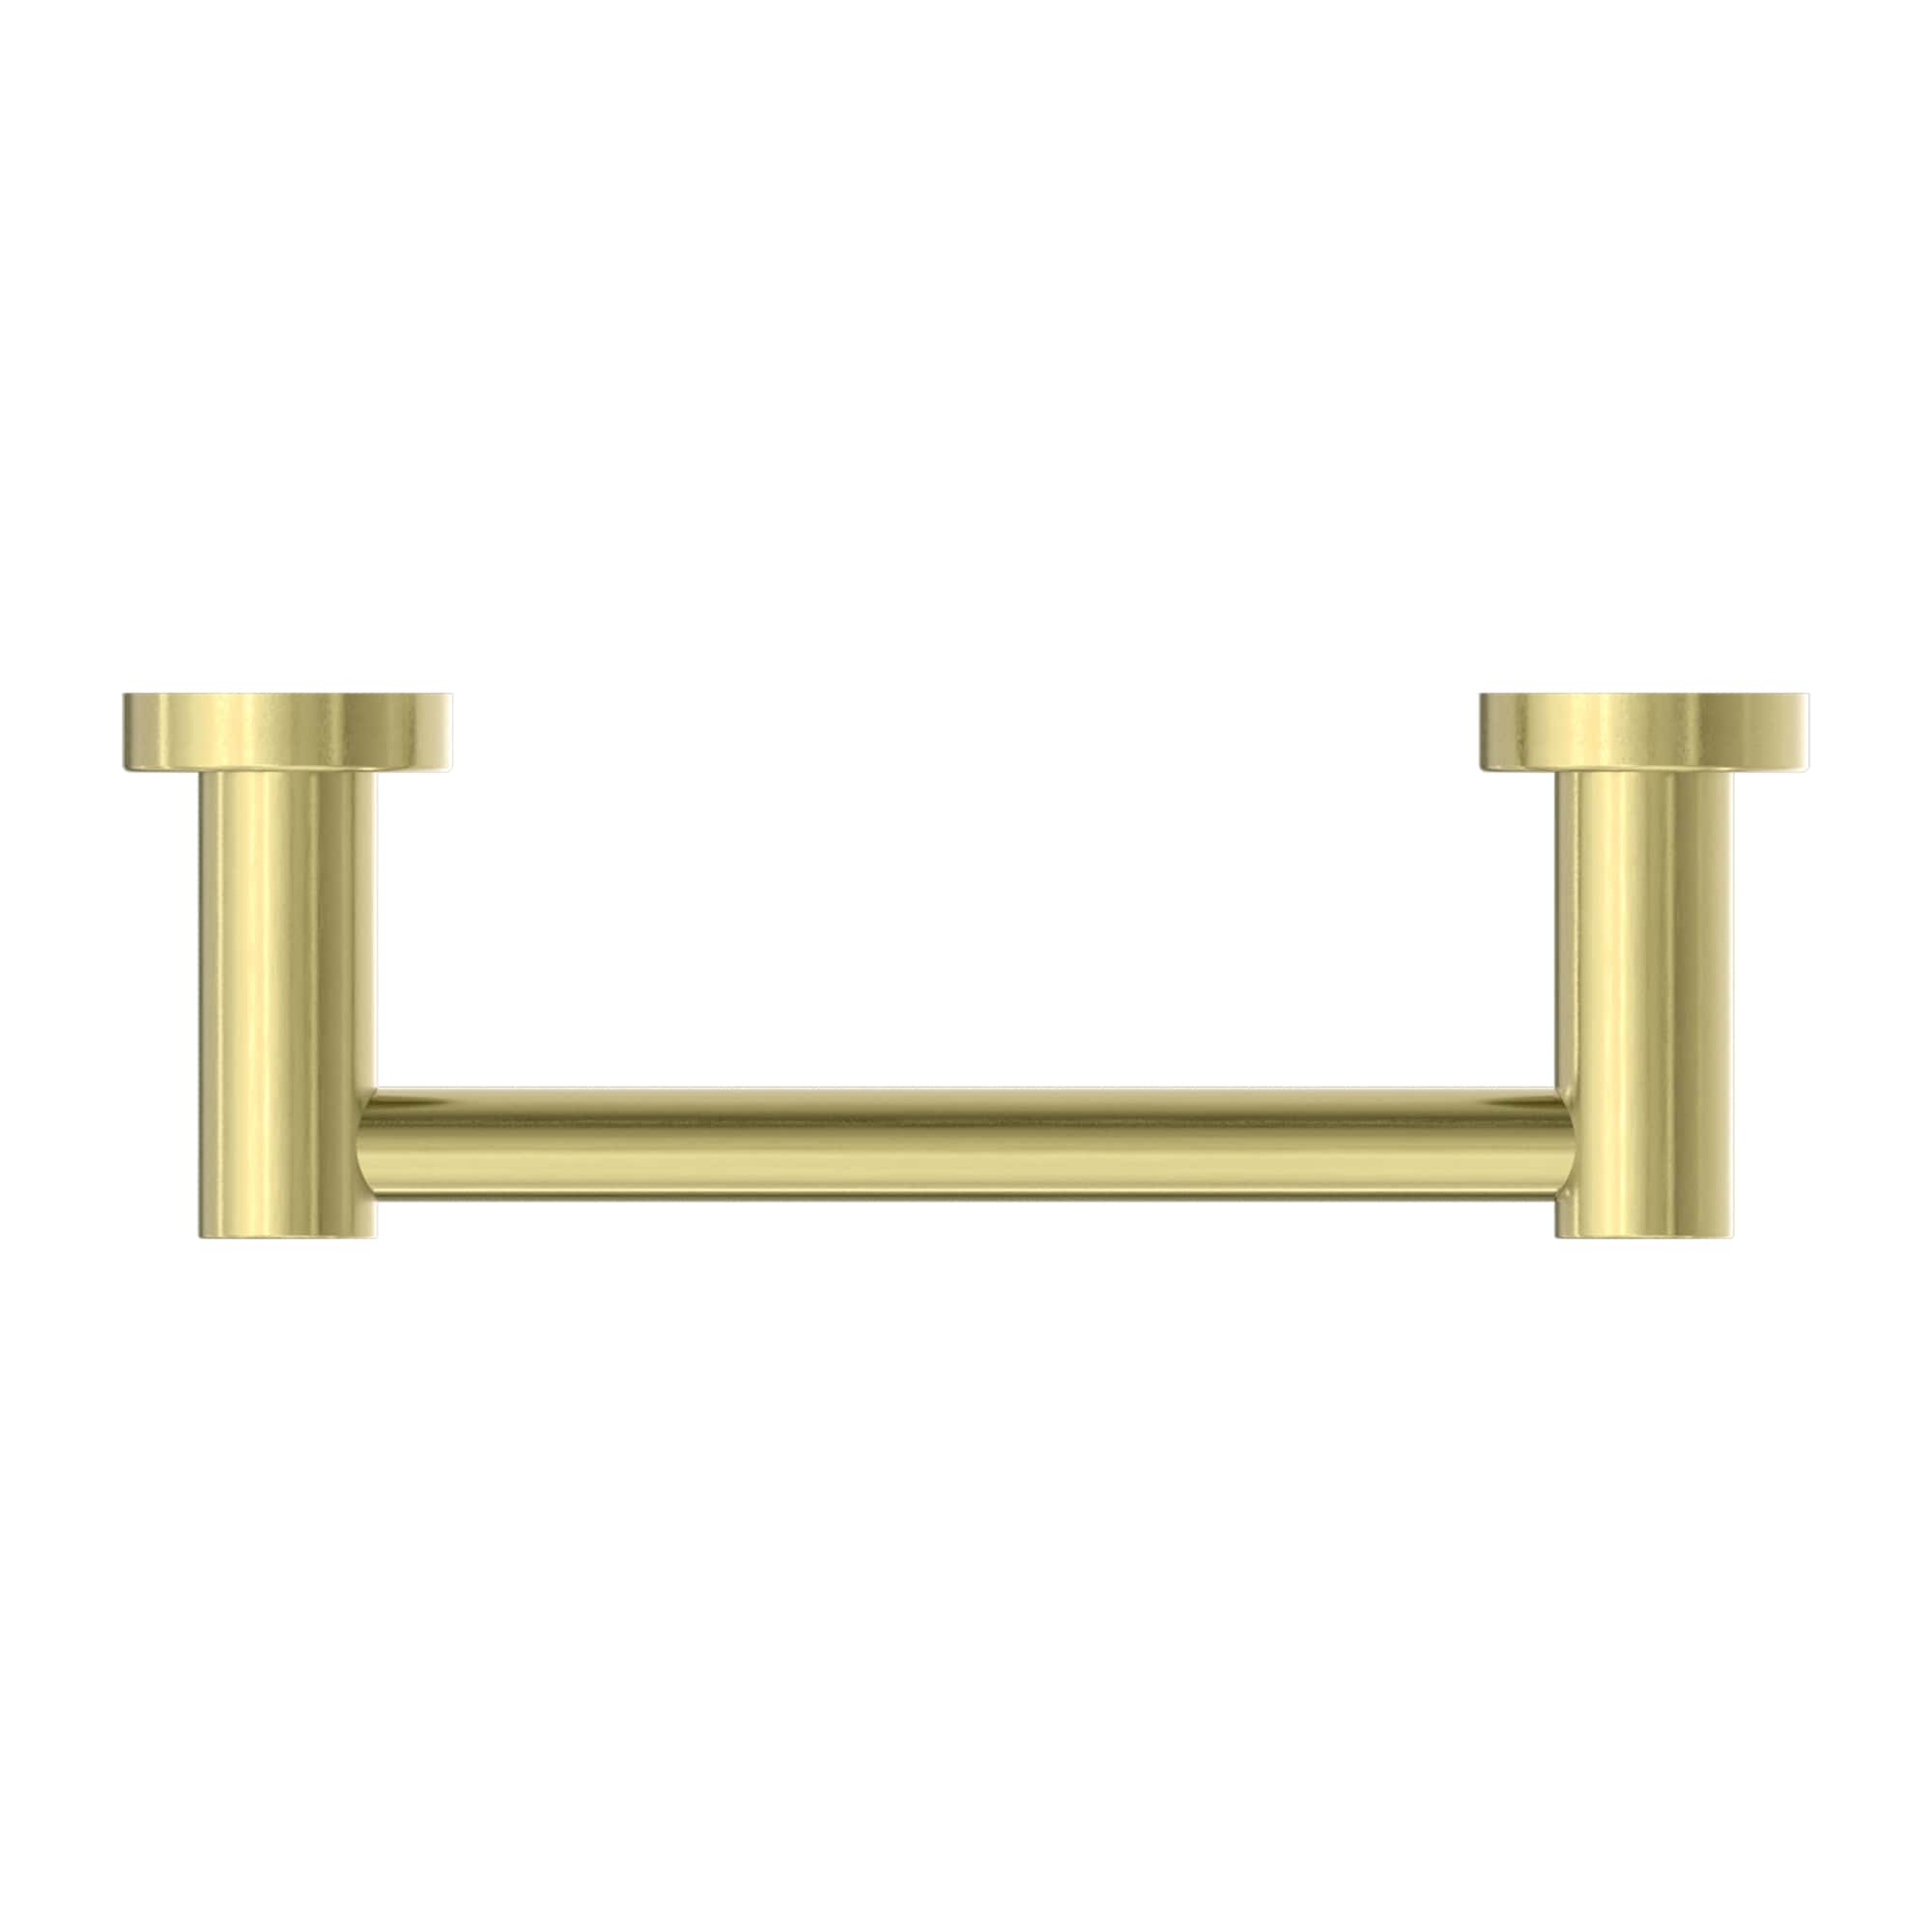 NERO MECCA NON-HEATED HAND TOWEL RAIL 230MM BRUSHED GOLD